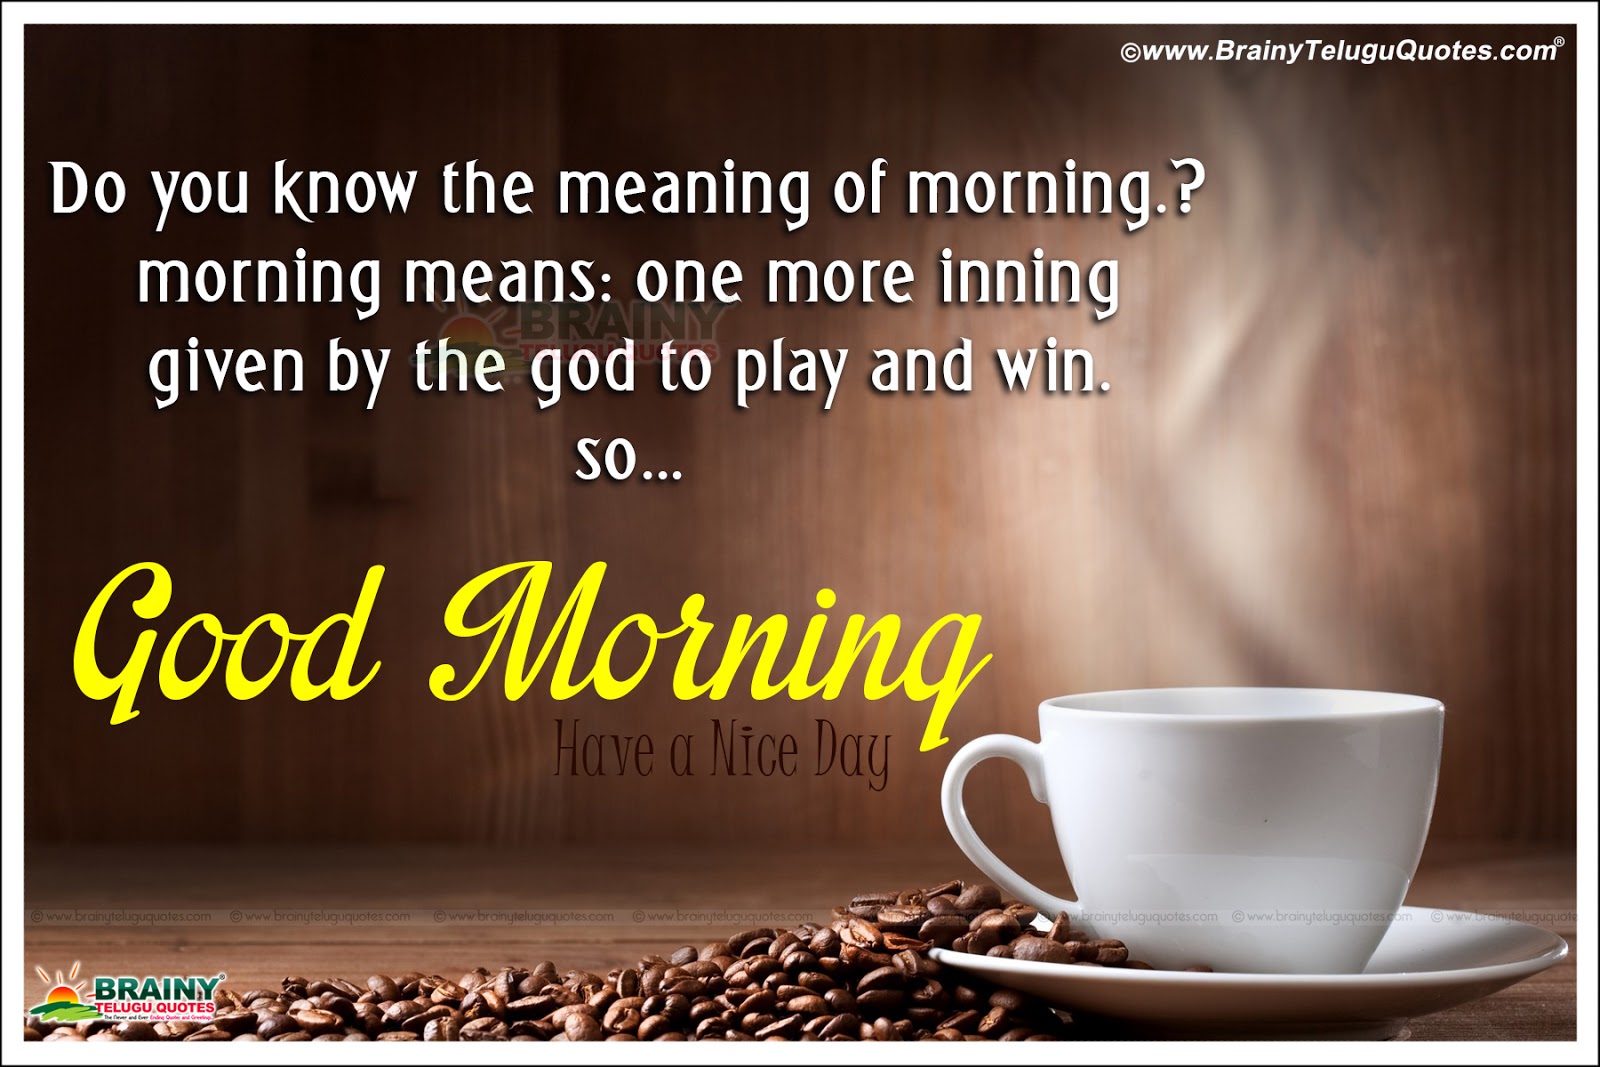 Inspirational Good Morning Messages Motivations Wallpapers